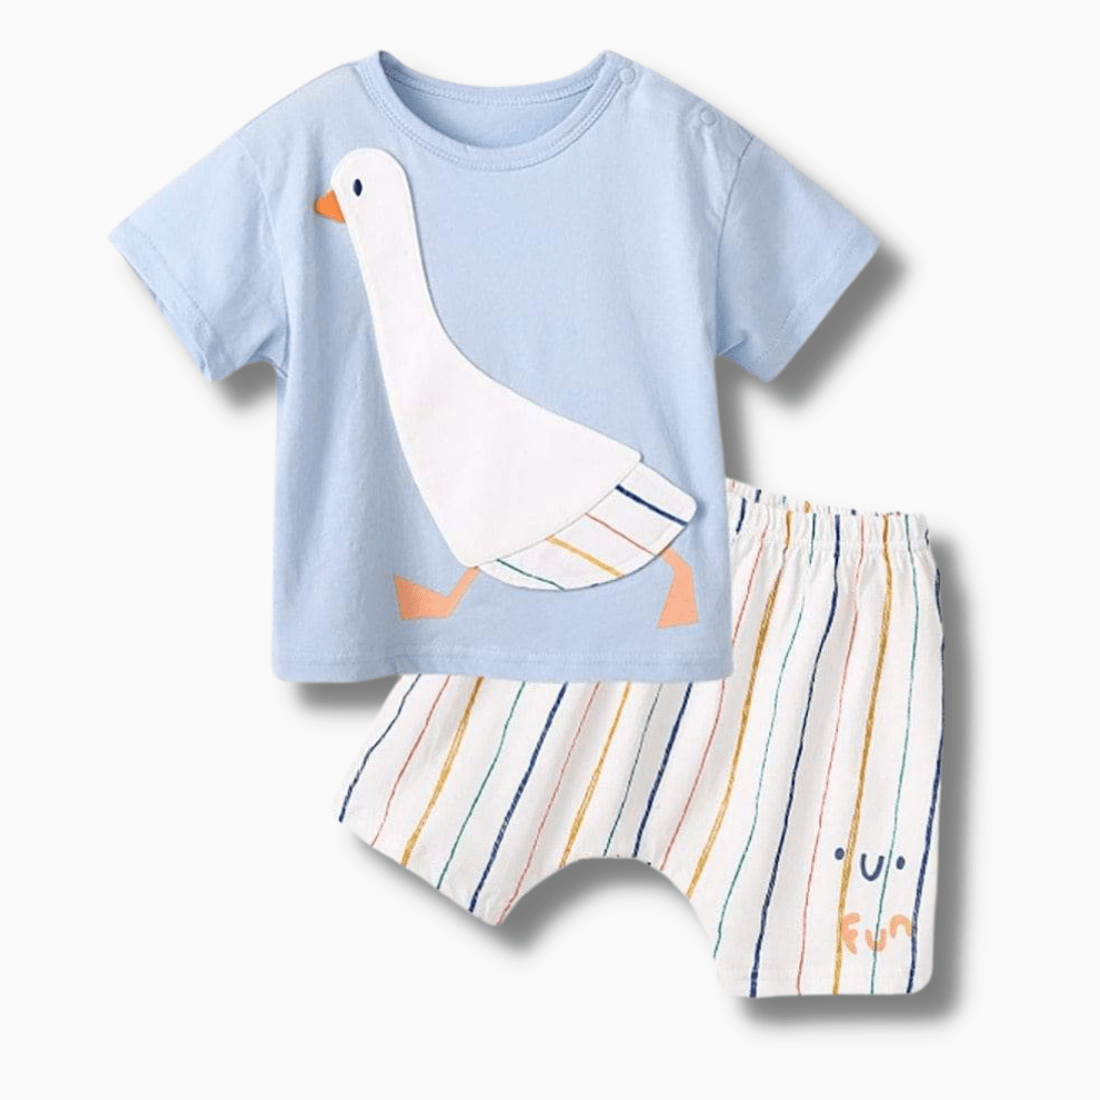 Boy's Clothing 2 Pcs Short Sleeve Outfit